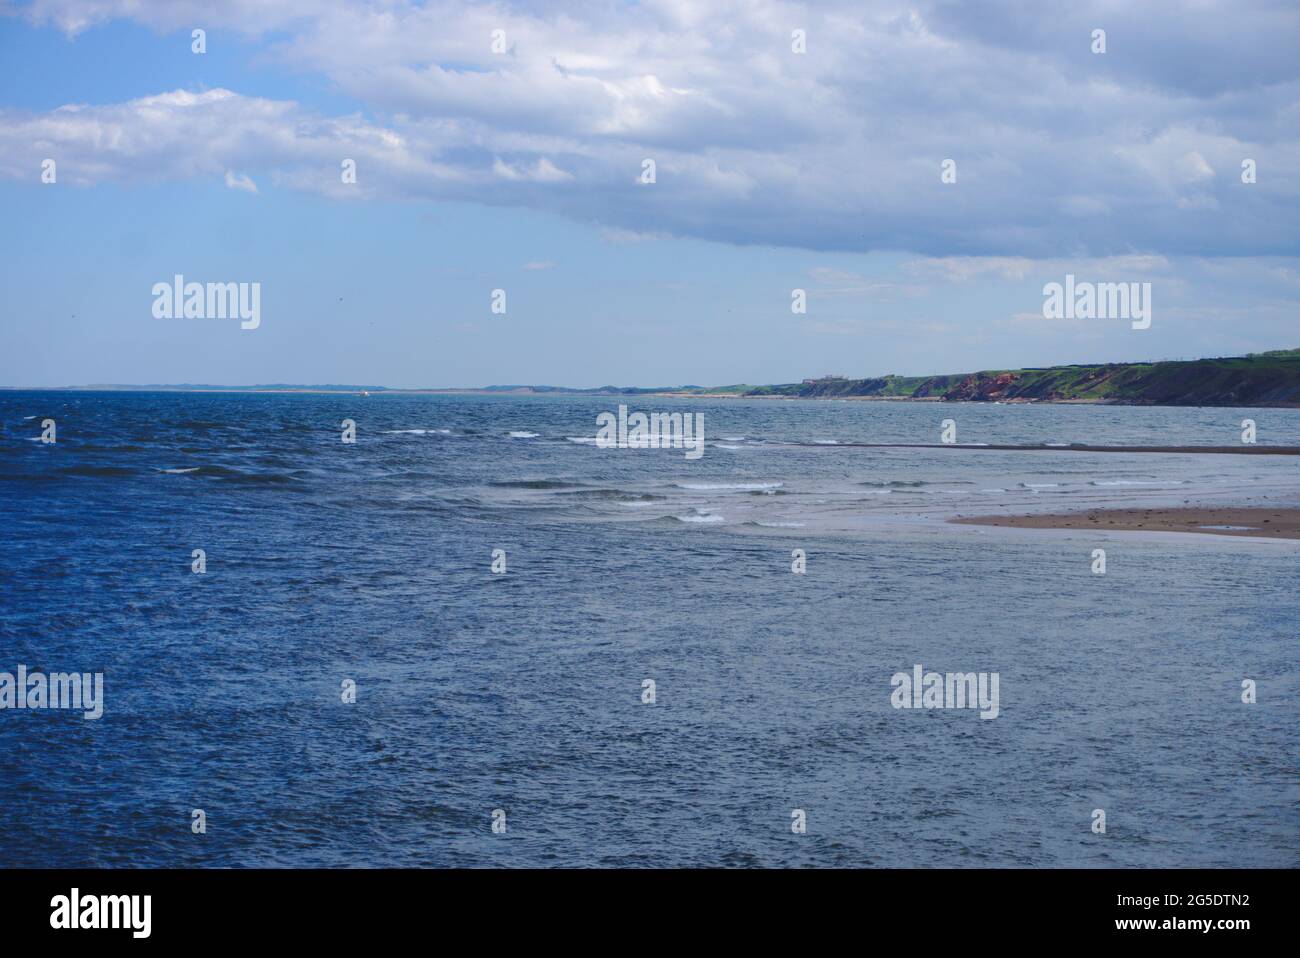 View from Berwick-upon-Tweed across the North Sea down the Northumberland coast to Spittal beach, UK. Stock Photo